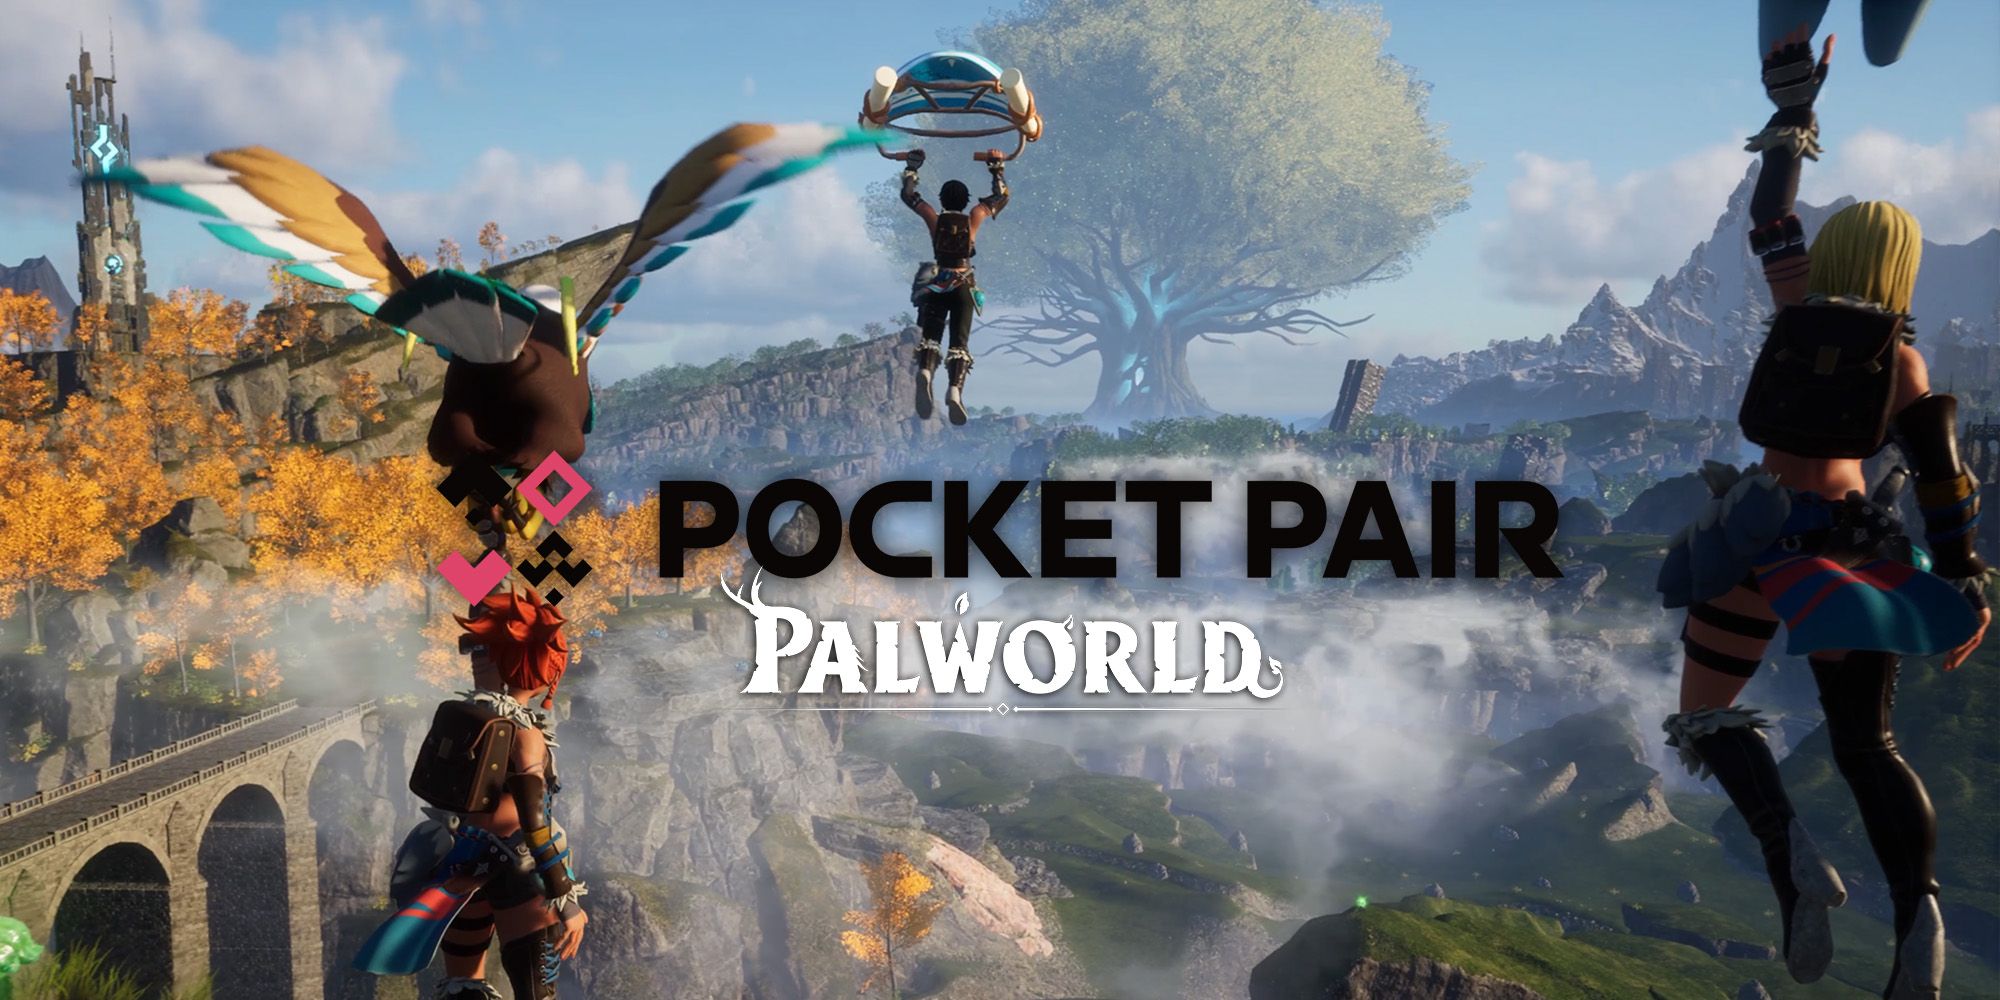 Palworld - Screenshot From Game With Pocketpair And Palworld Logos on top